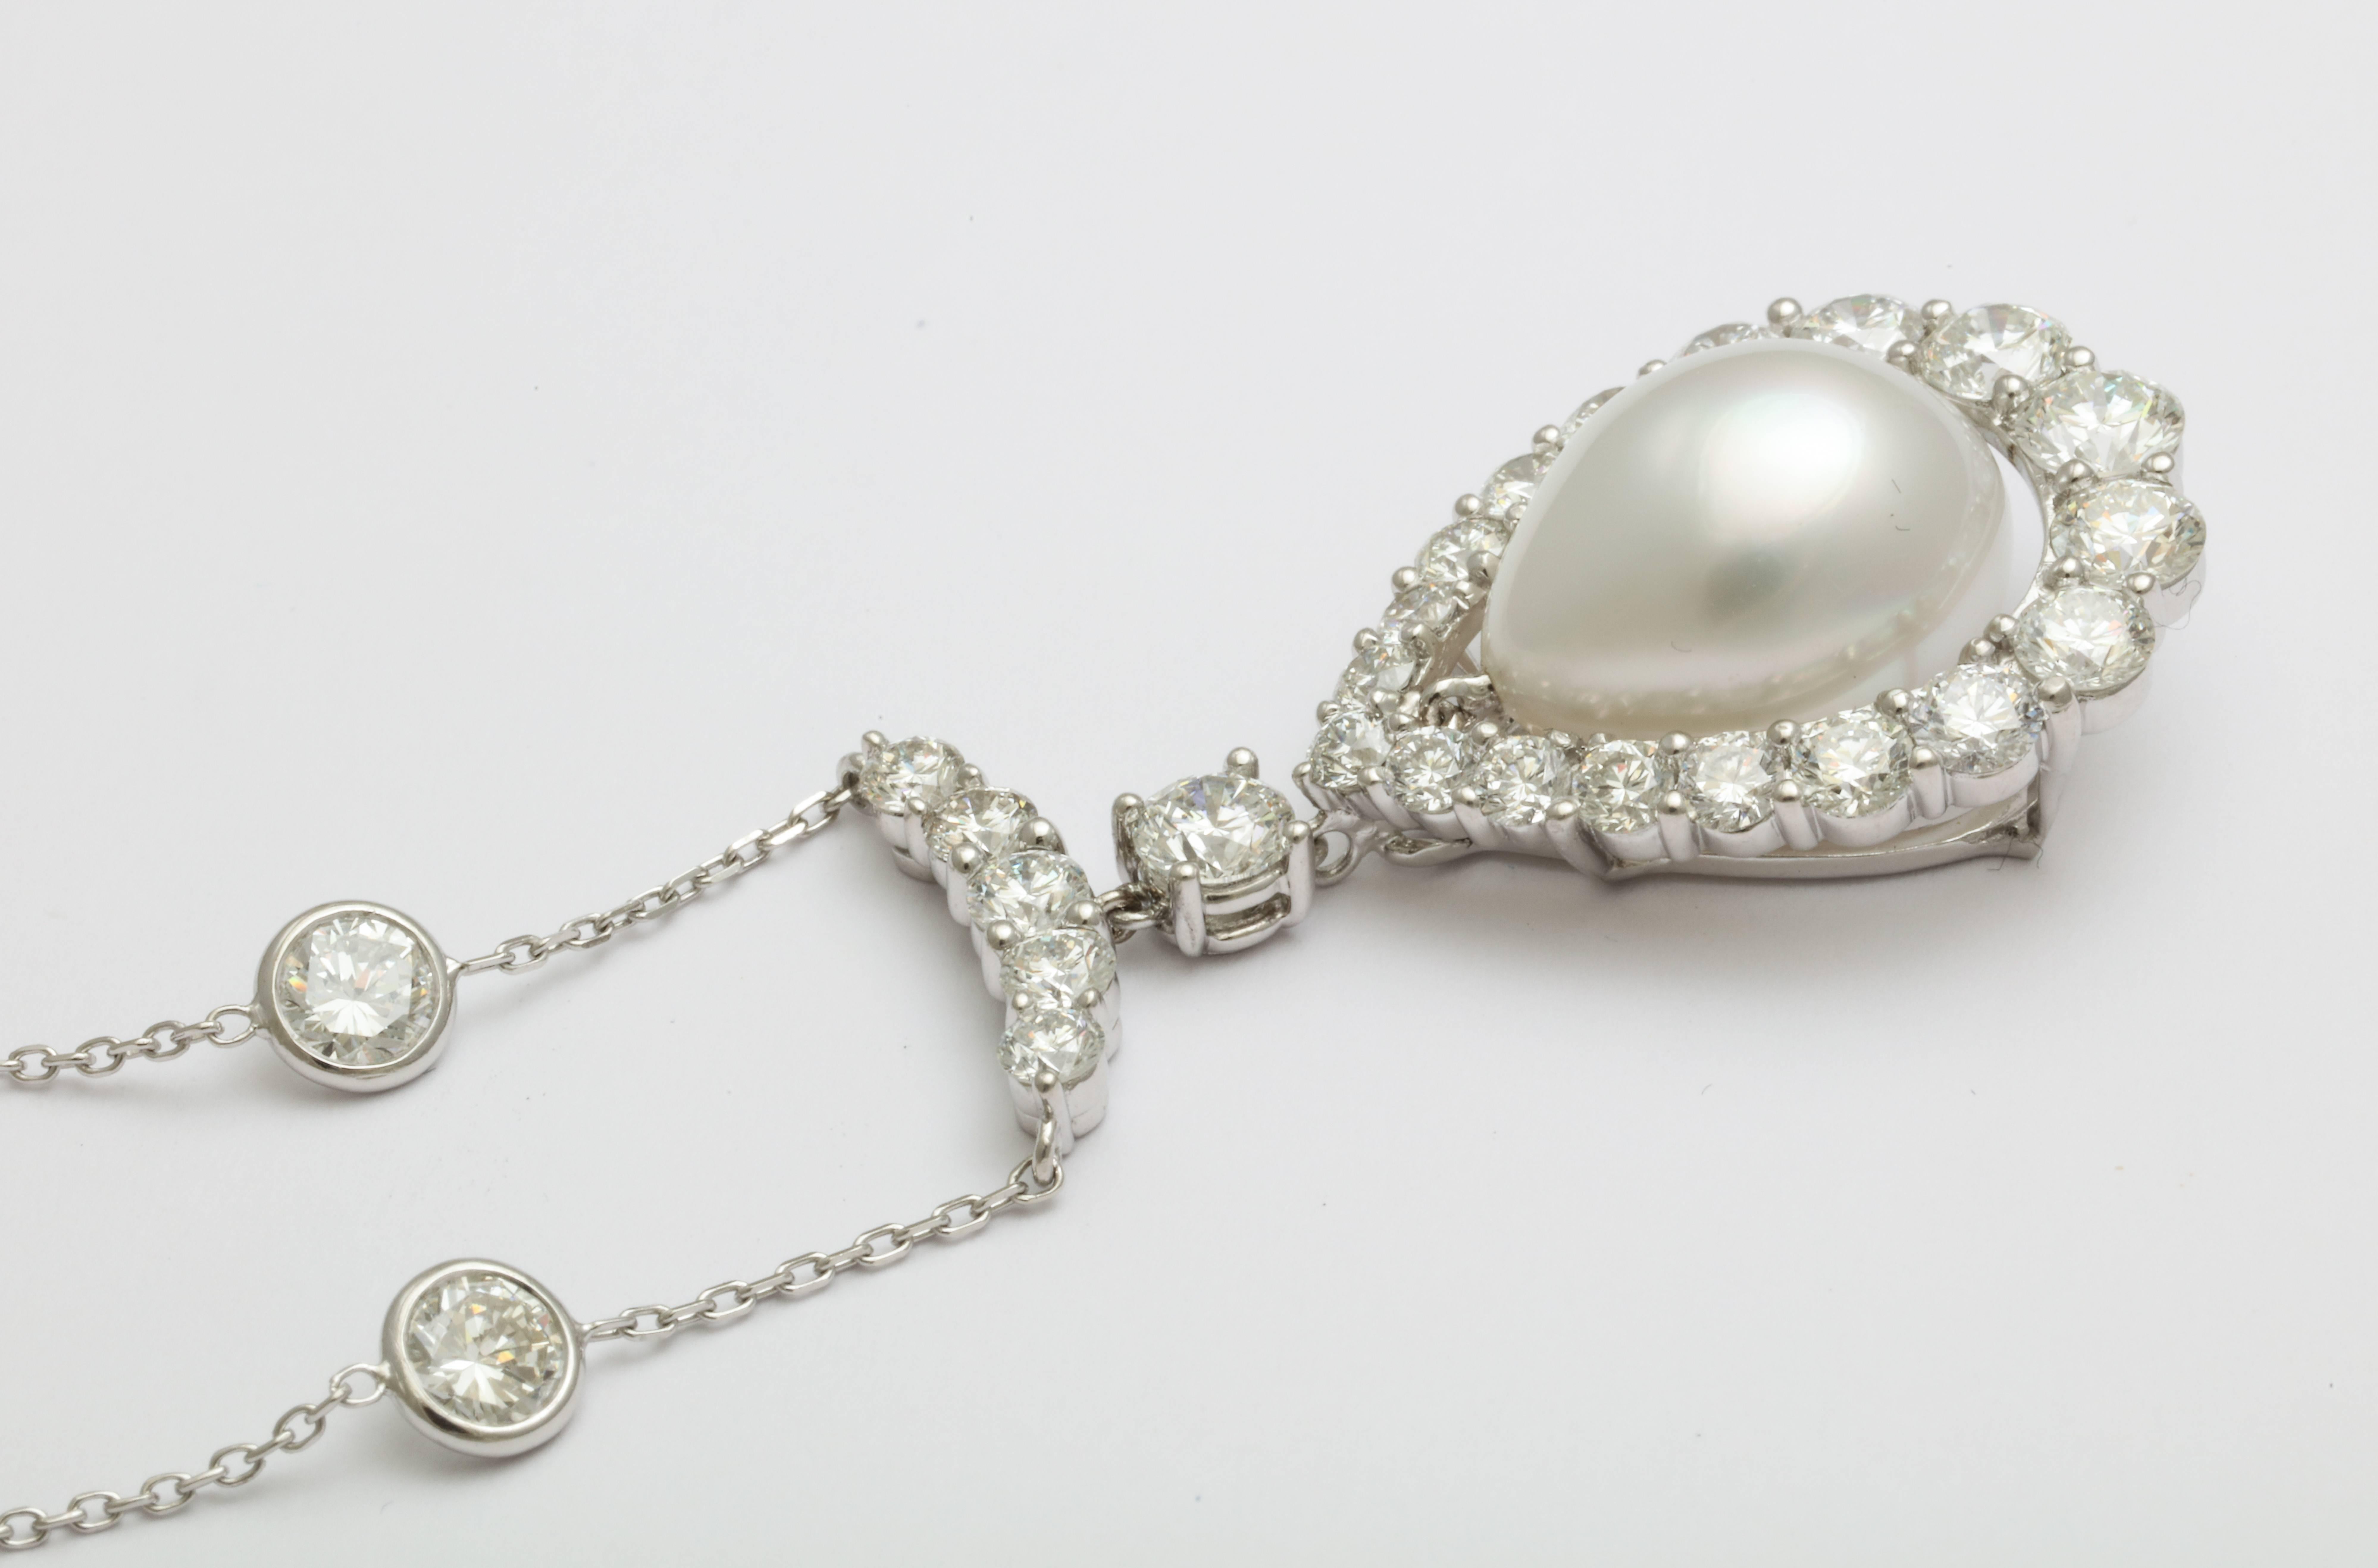 Superb modern twist on a classic.  A platinum necklace featuring a large, beautifully tapered shape South Sea pearl drop (16 x 12.8 mm) surrounded by top quality diamonds with a total weight of 4.24 carats. The chain features diamonds with a total